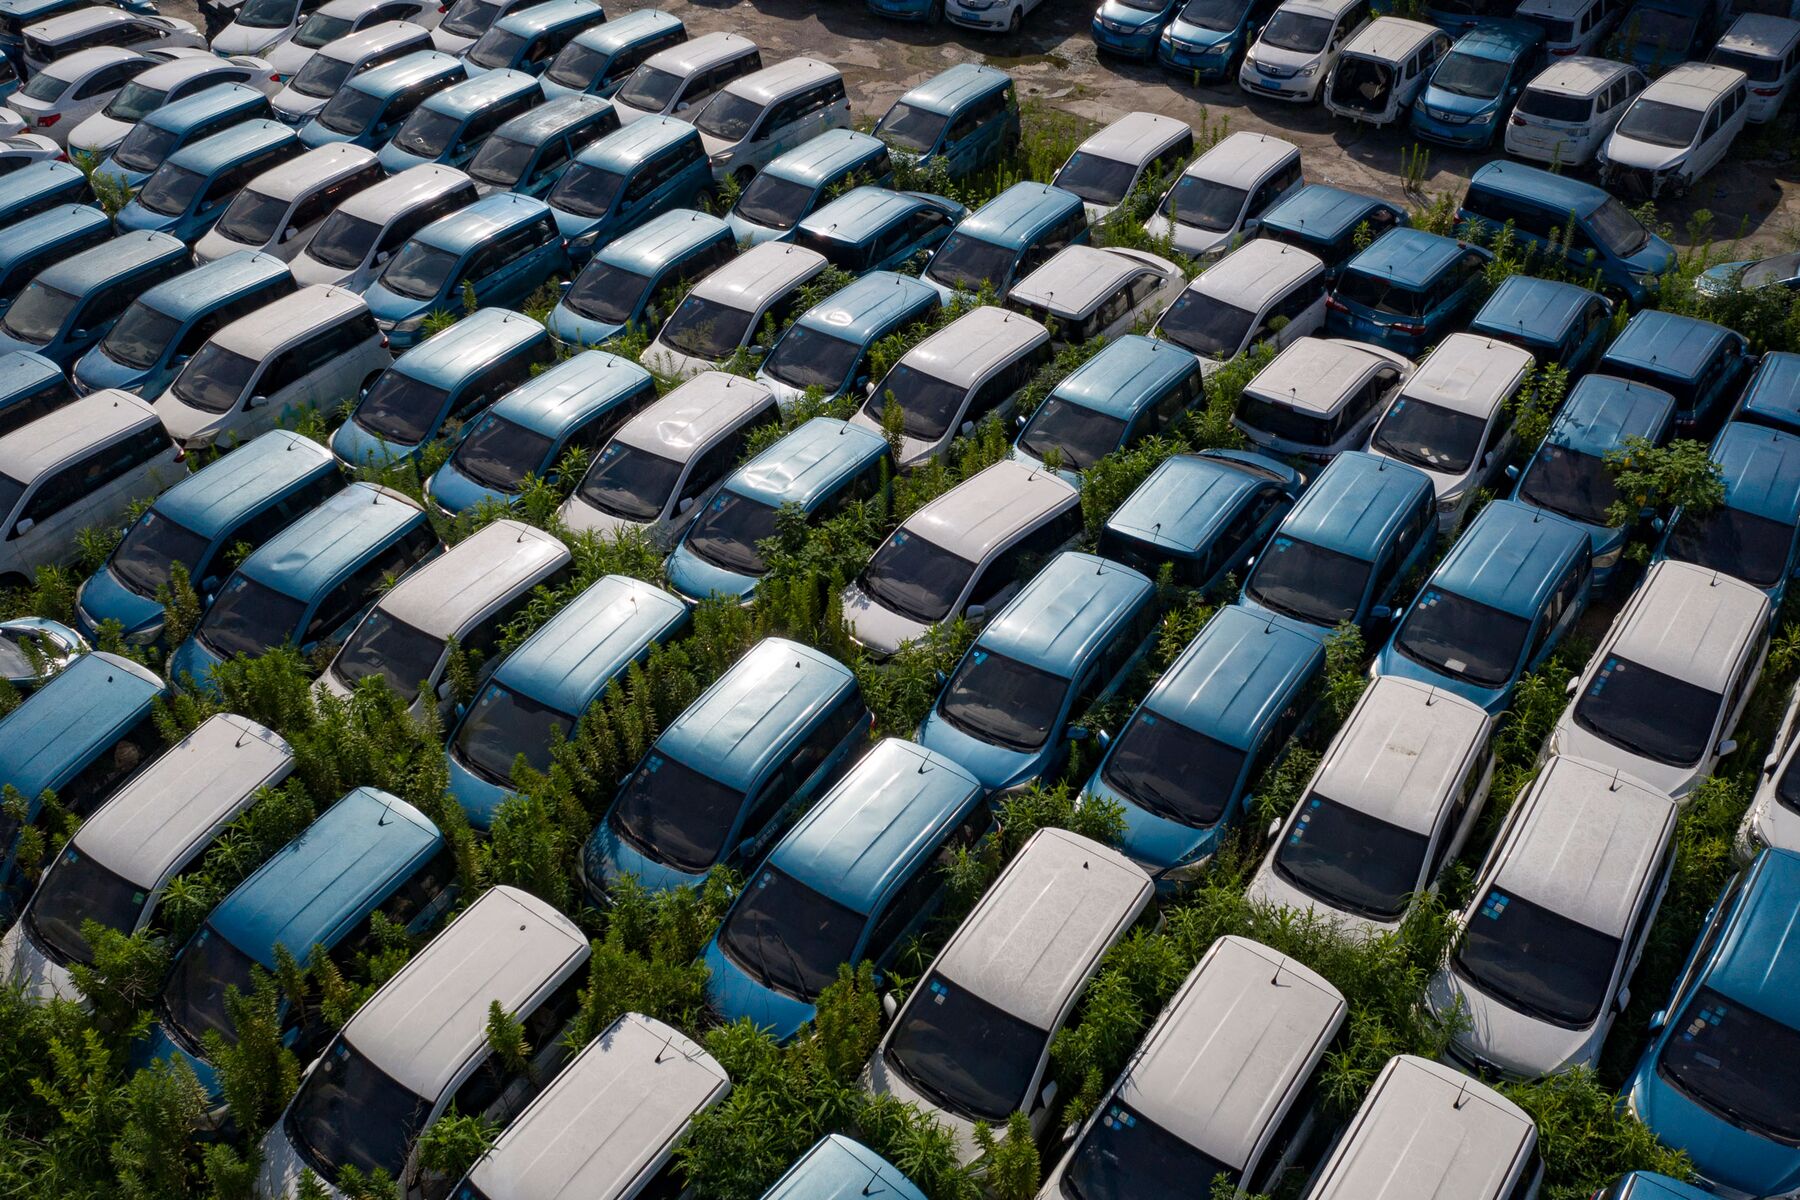 China’s Abandoned Electric Cars Pile Up After EV Boom Fueled by Subsidies